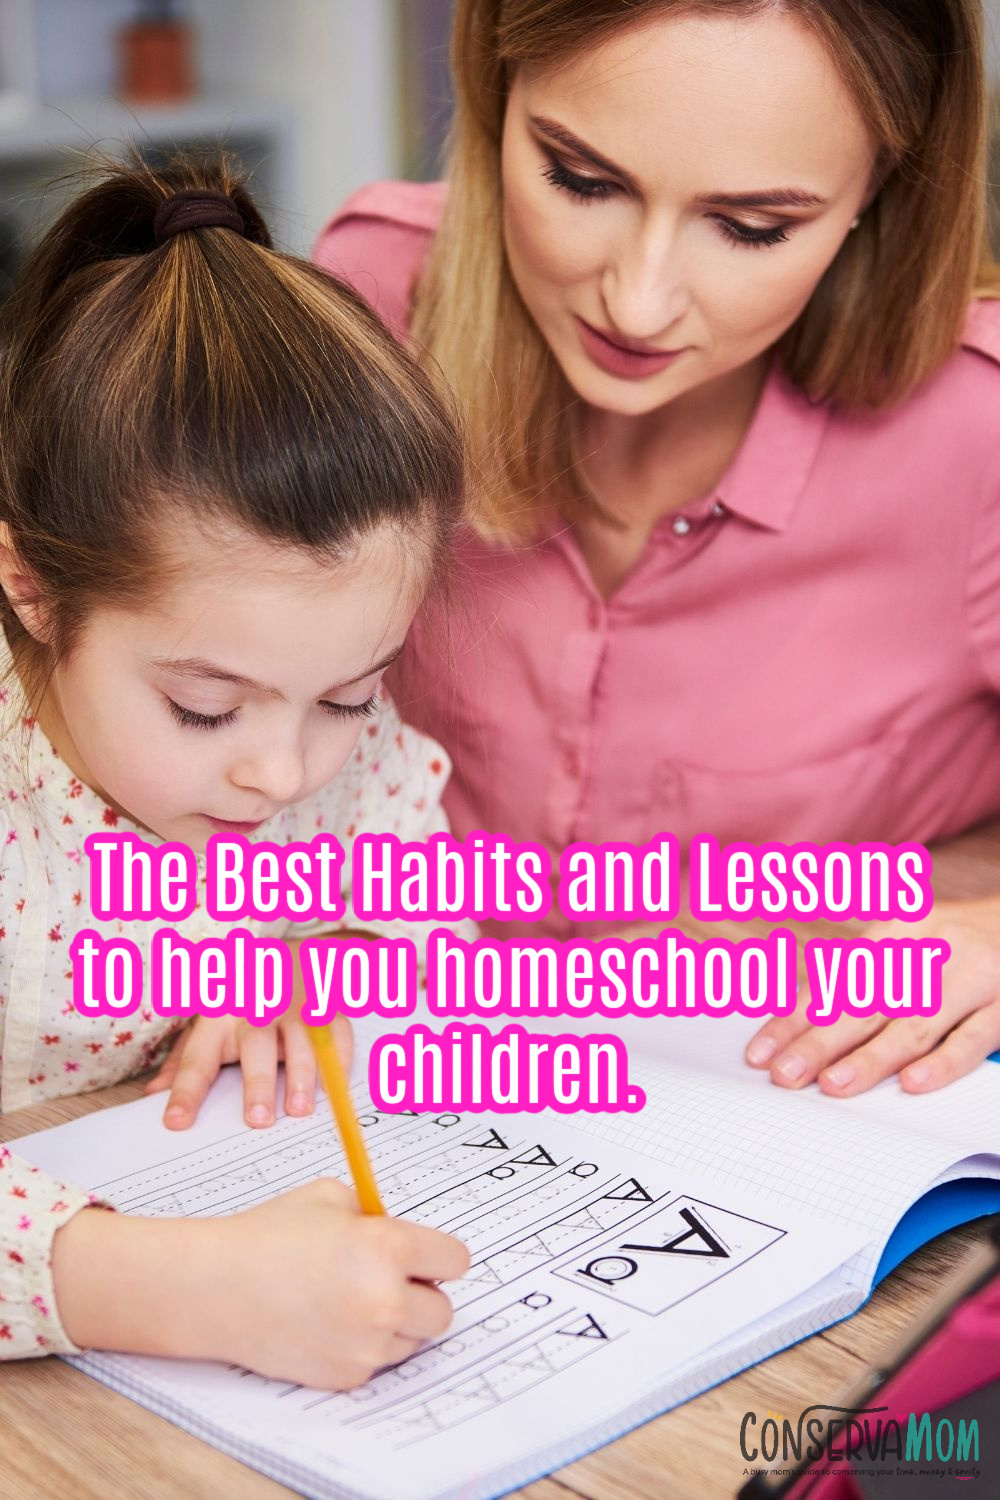 The Best Habits and Lessons  to help you homeschool your children.